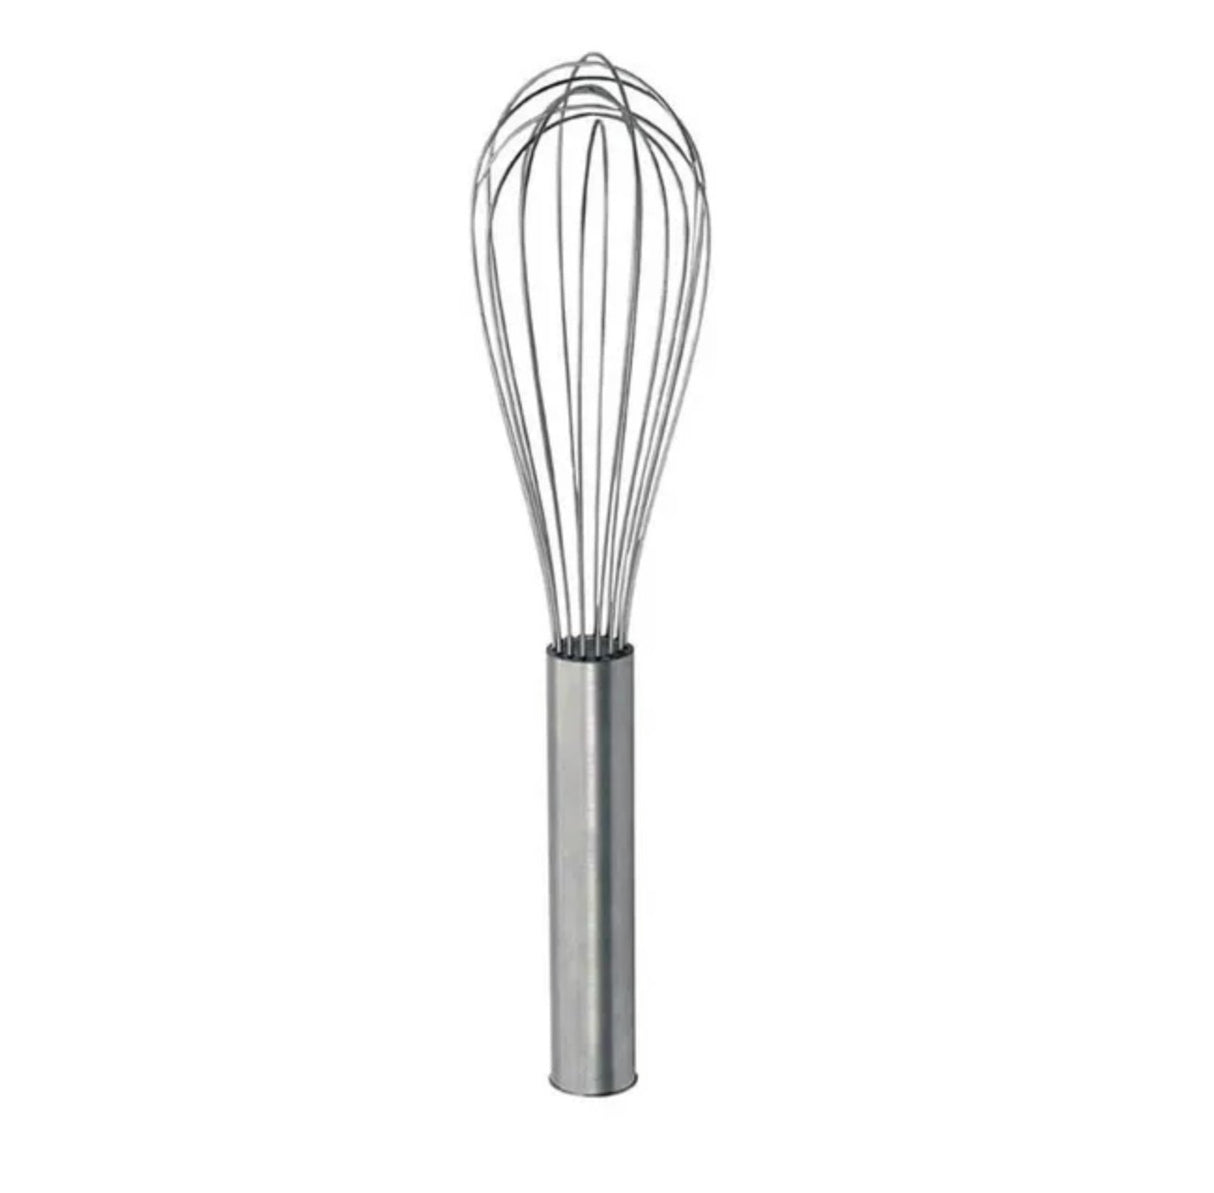 WHISK PIANO 30CM - Cafe Supply